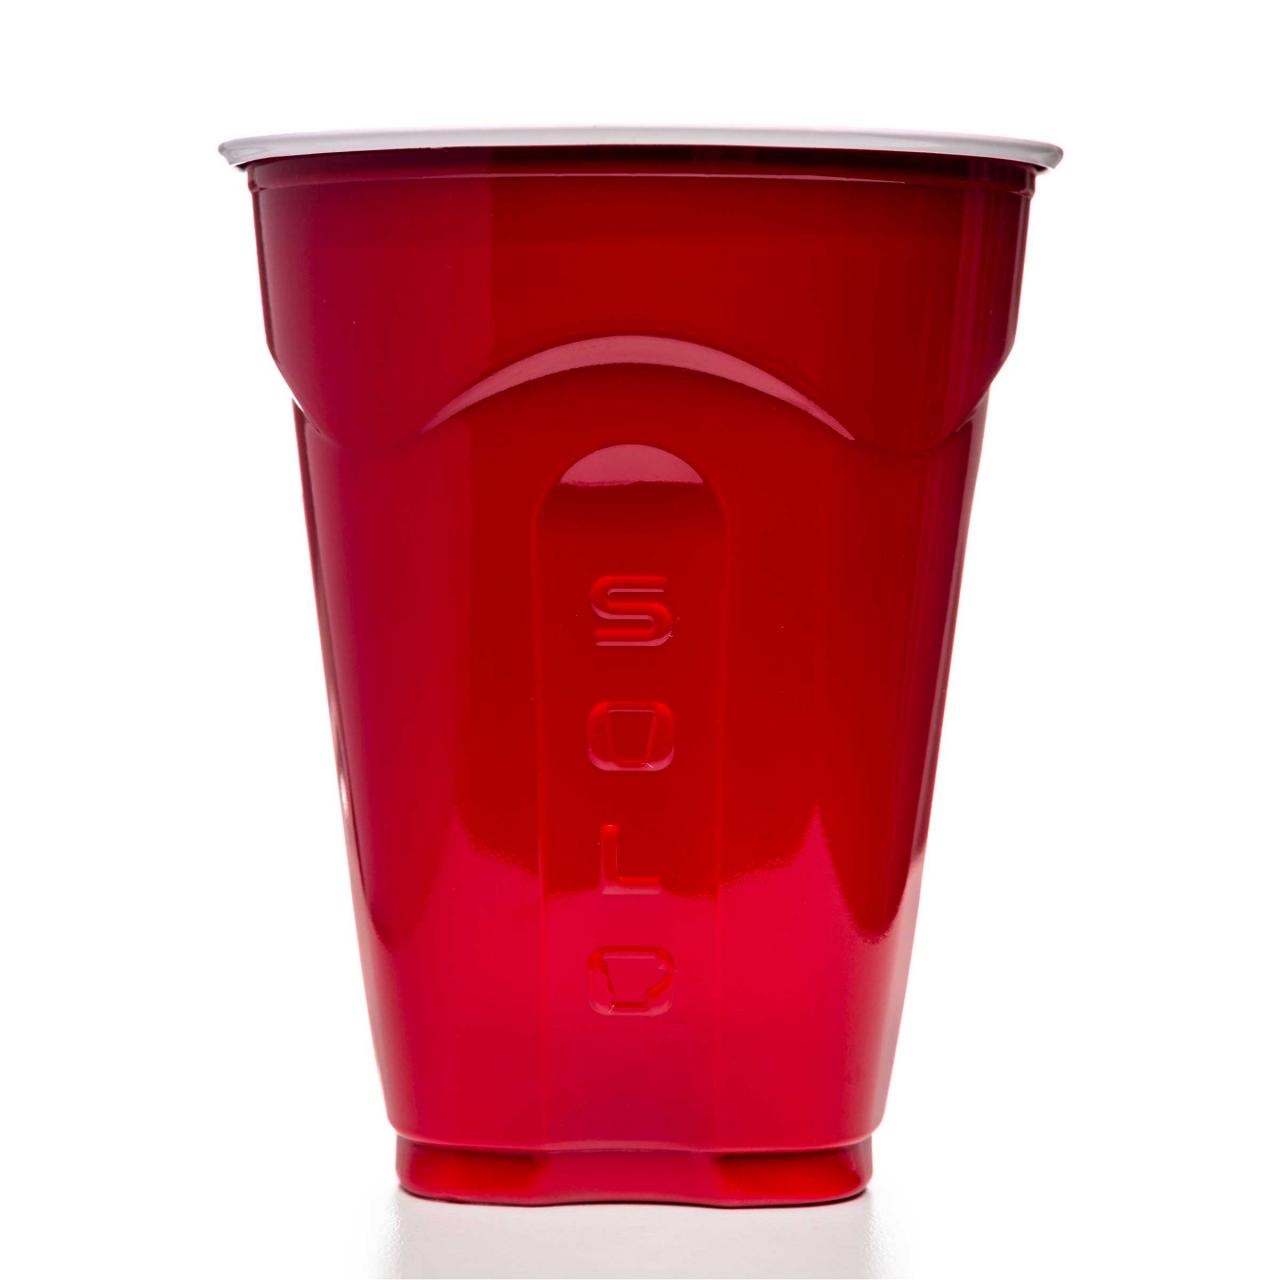 Red Cup Living Reusable Plastic Cocktail Glasses, 12 oz Red